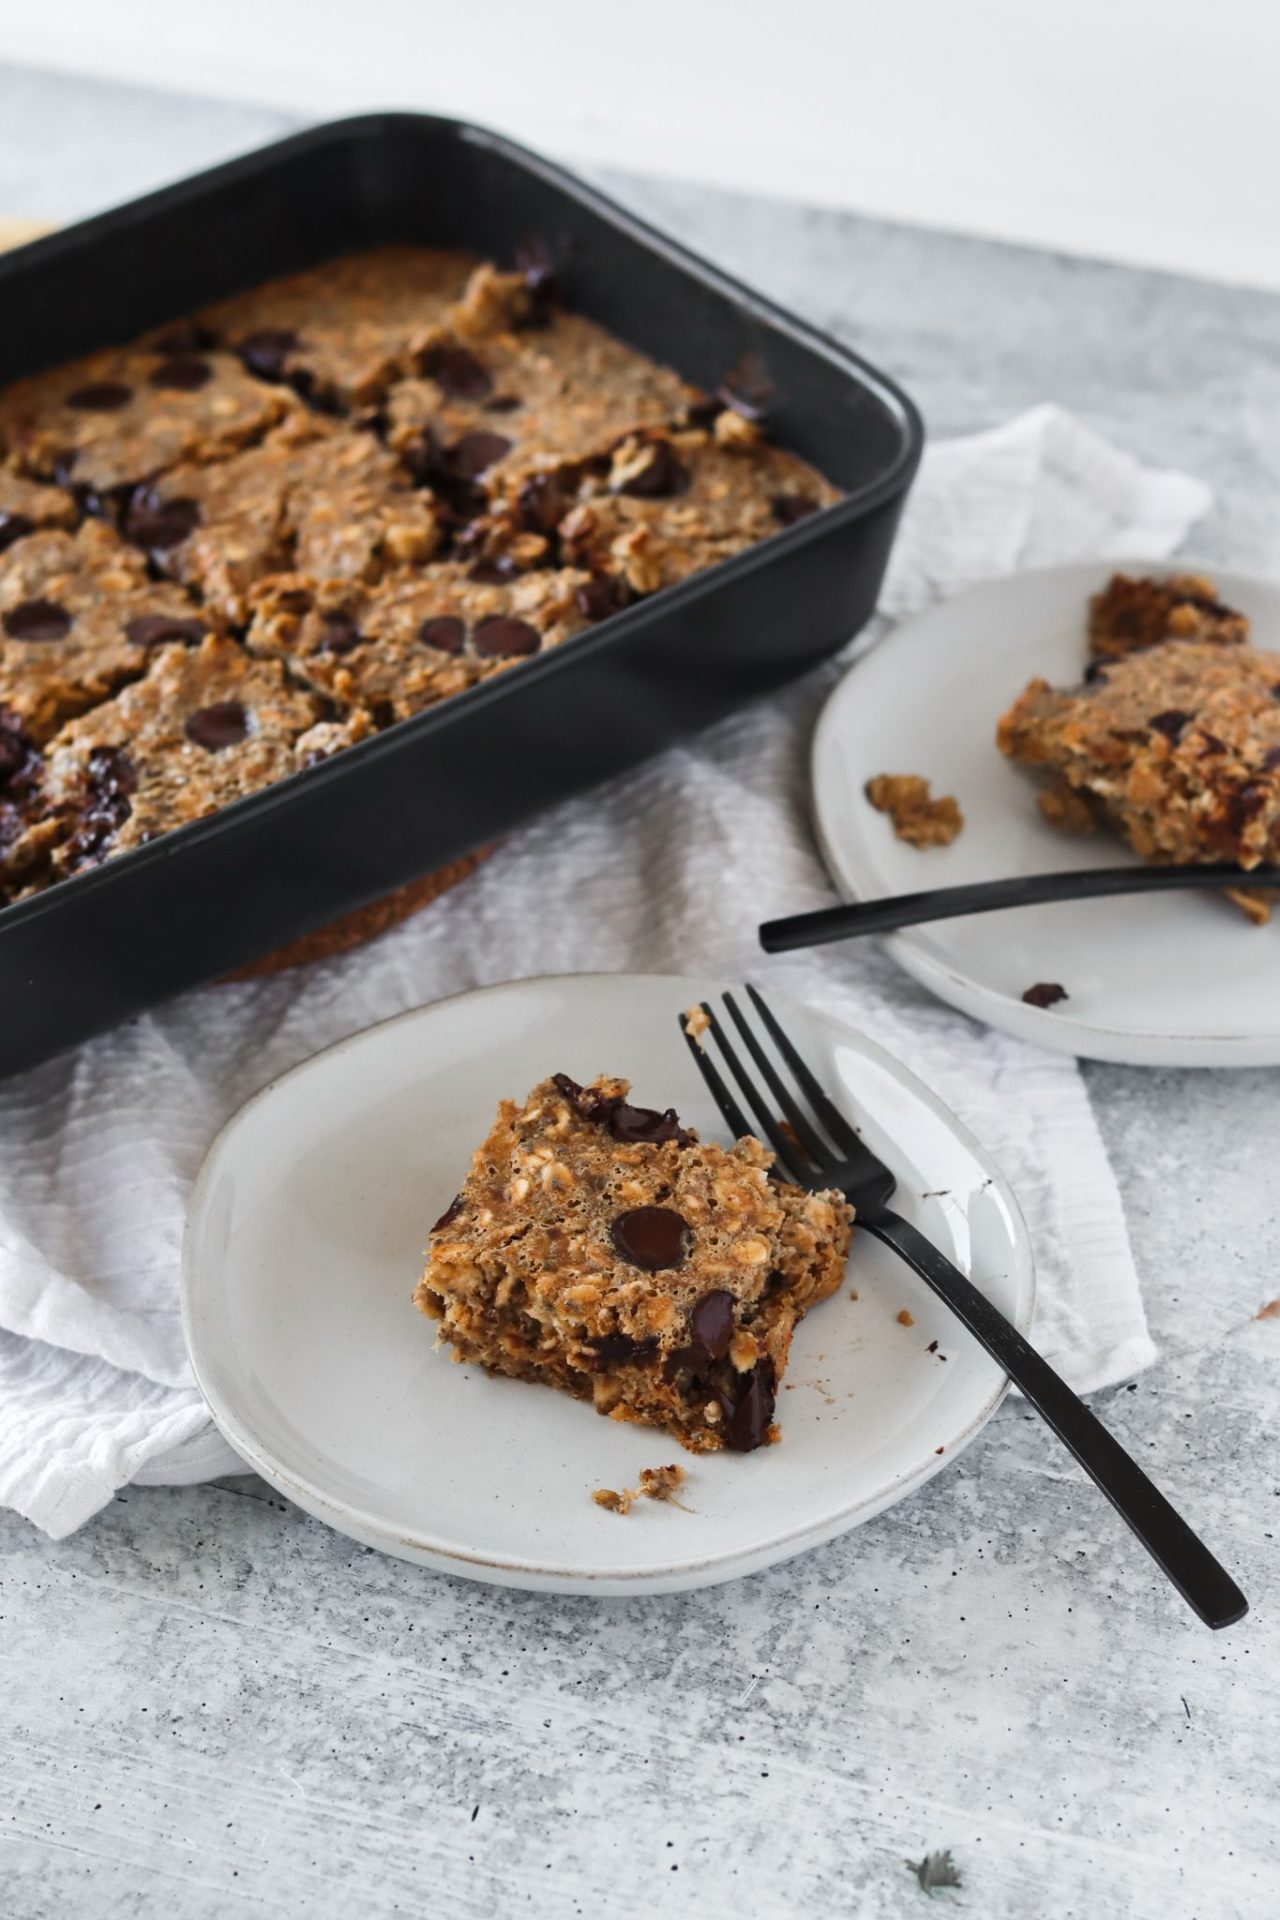 peanut butter banana chocolate chips baked oatmeal